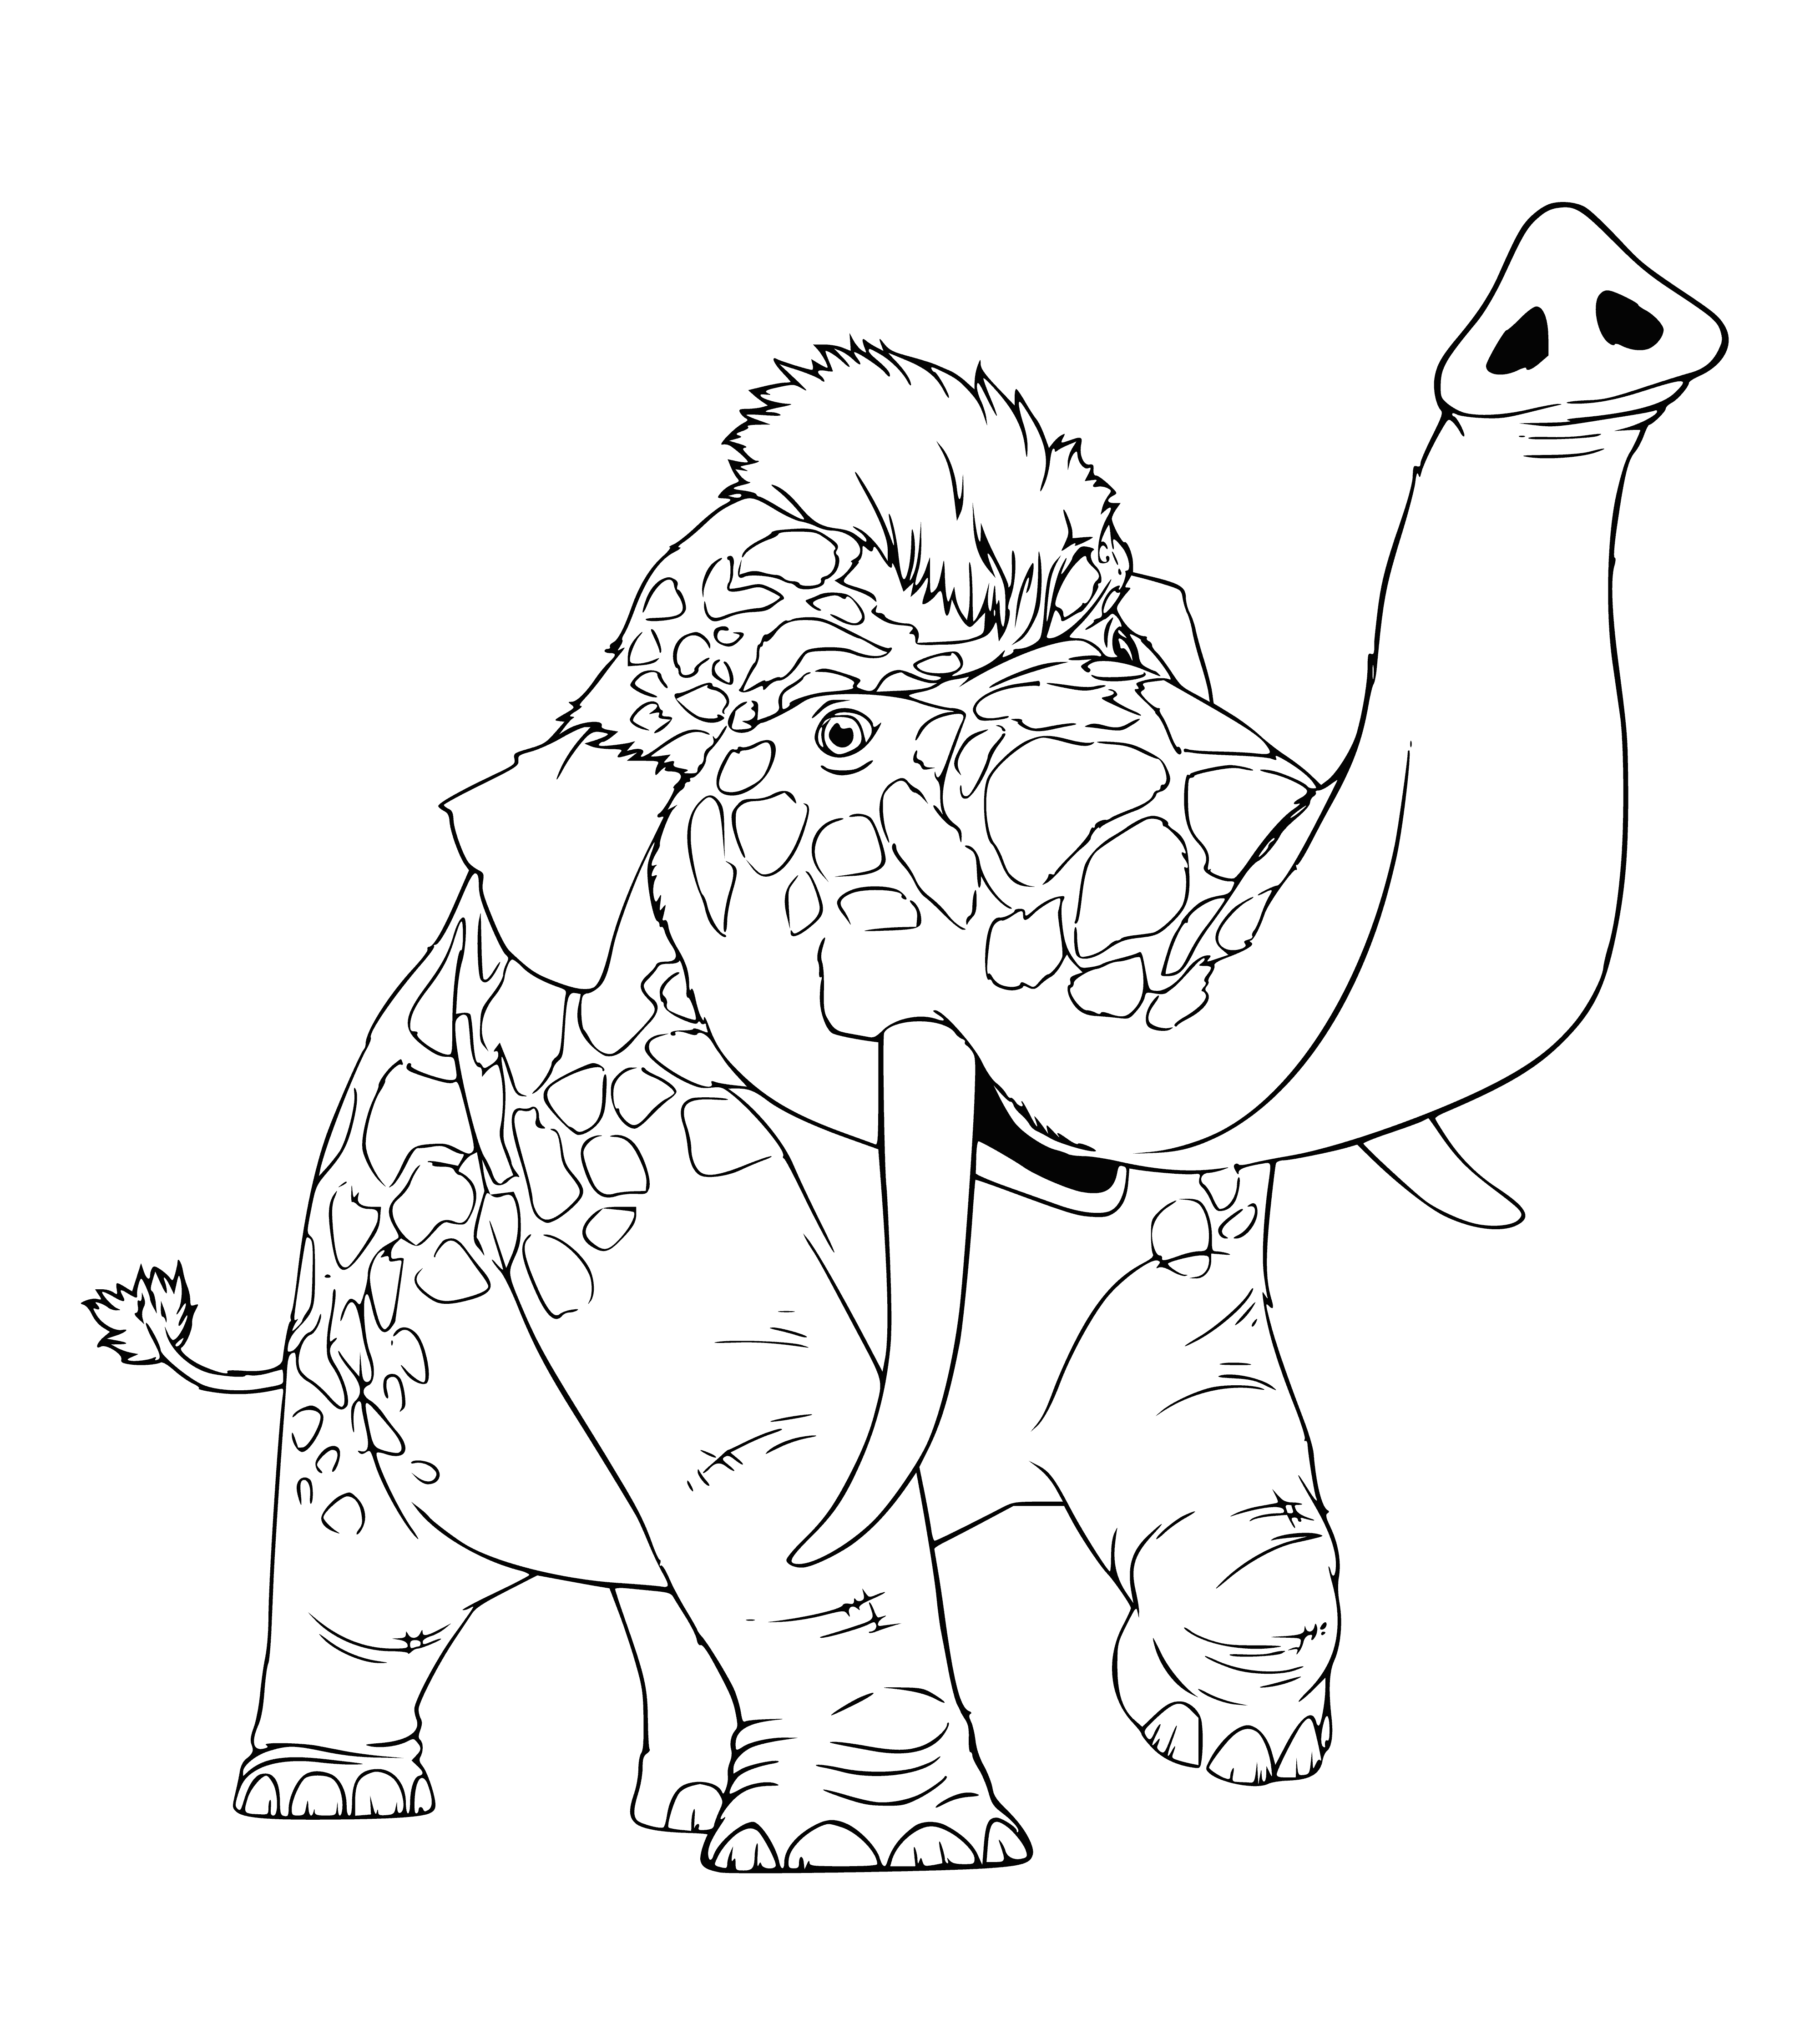 coloring page: In a dry landscape a huge, furry orange elephant-like creature with a long neck and legs eats from a tree, using its trunk for support.